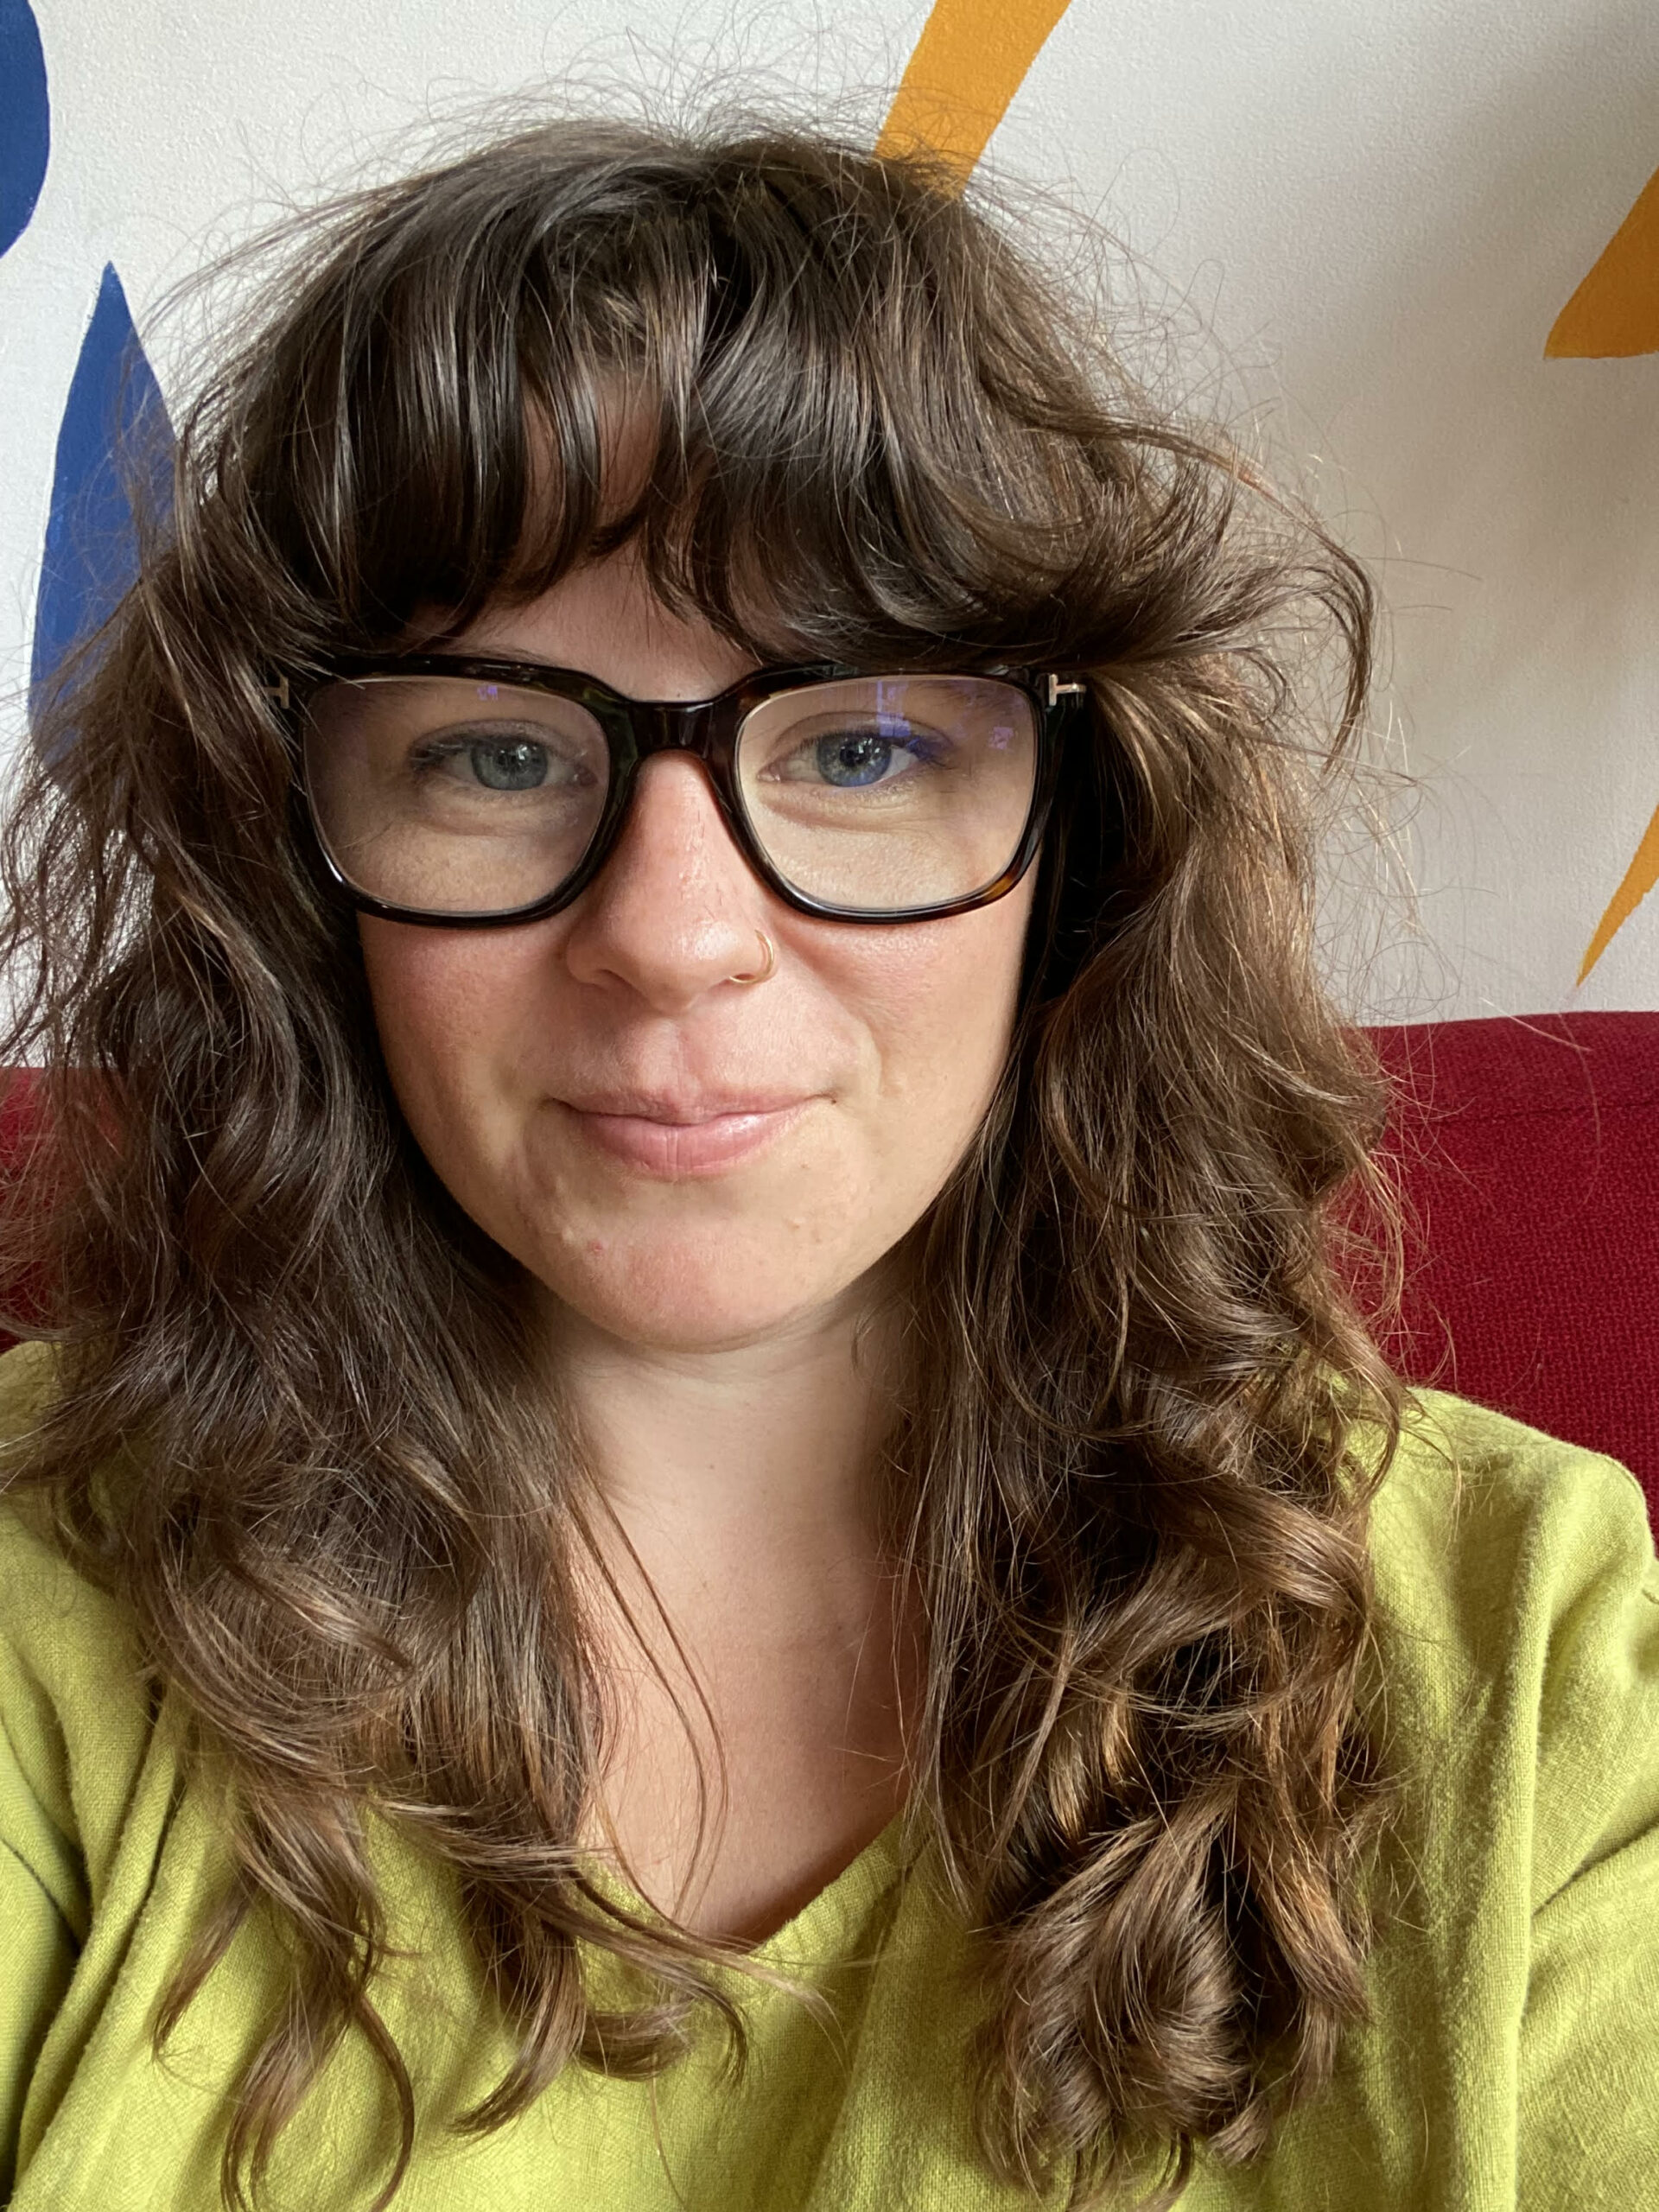 Mary Sauer is wearing a yellow top and oval glasses with thick black rims; she sits in front of a white and red background and her hair is long, curly and has bangs.